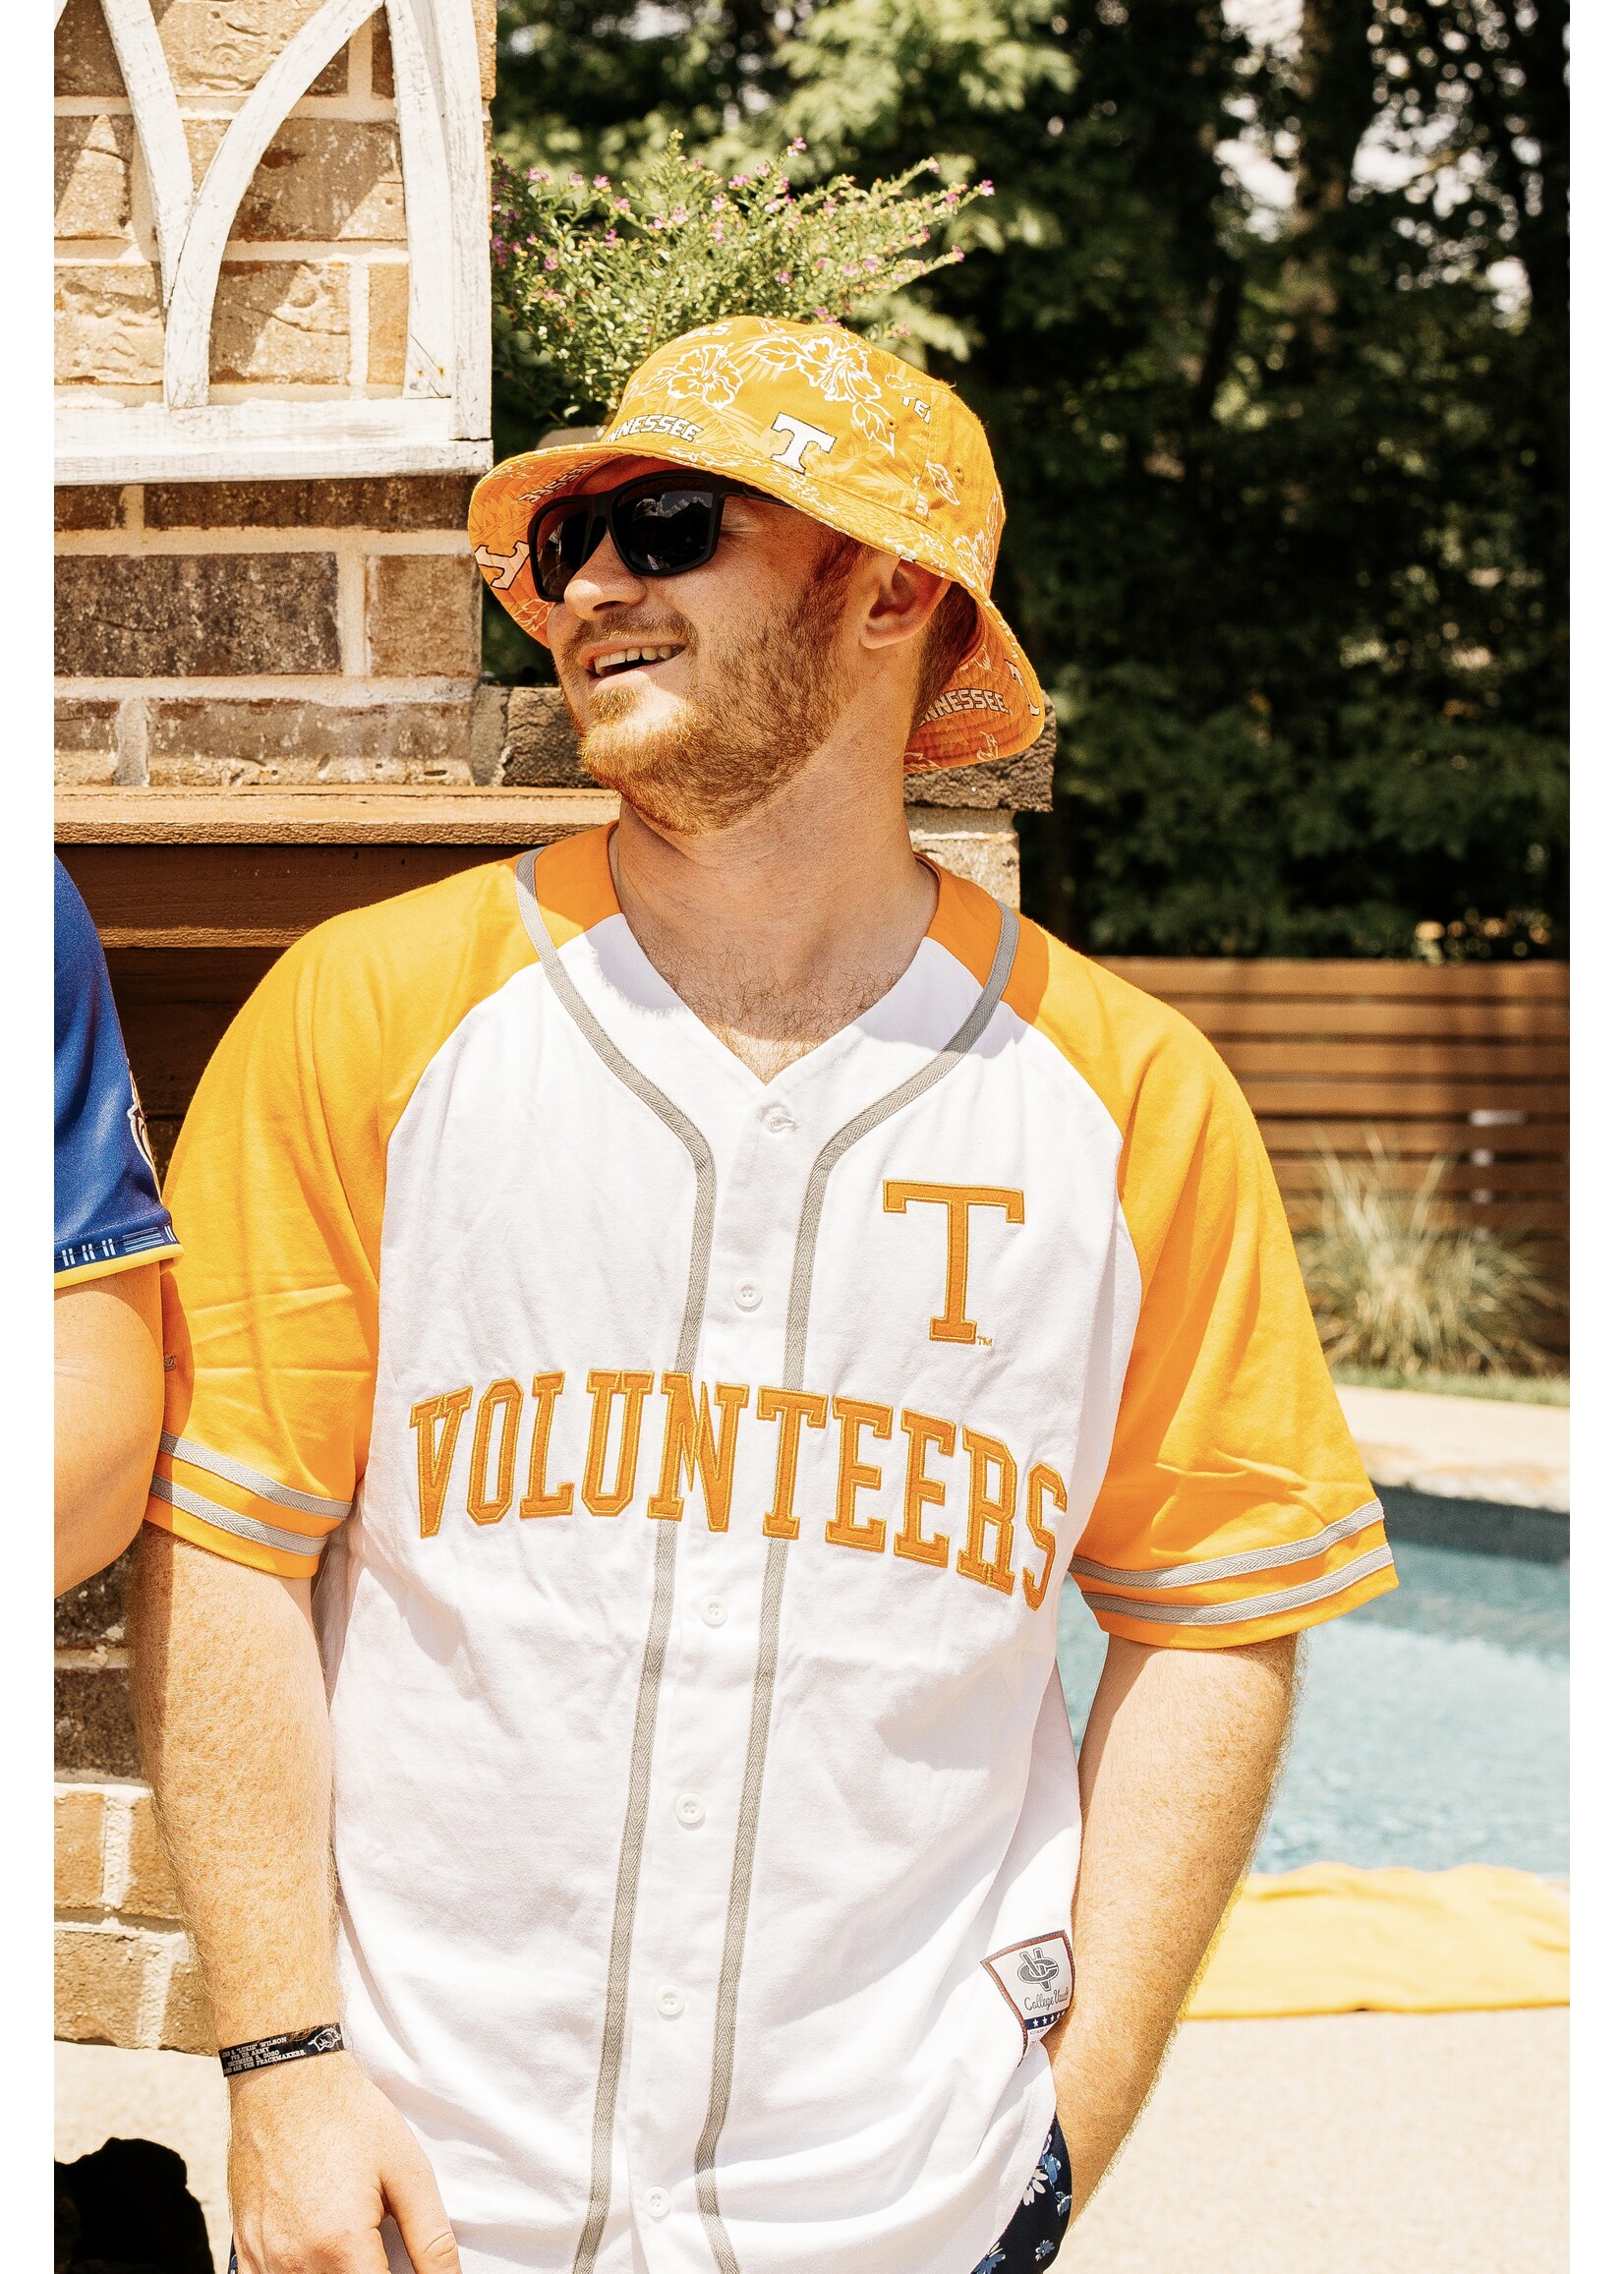 Mitchell & Ness University of Tennessee Practice Jersey